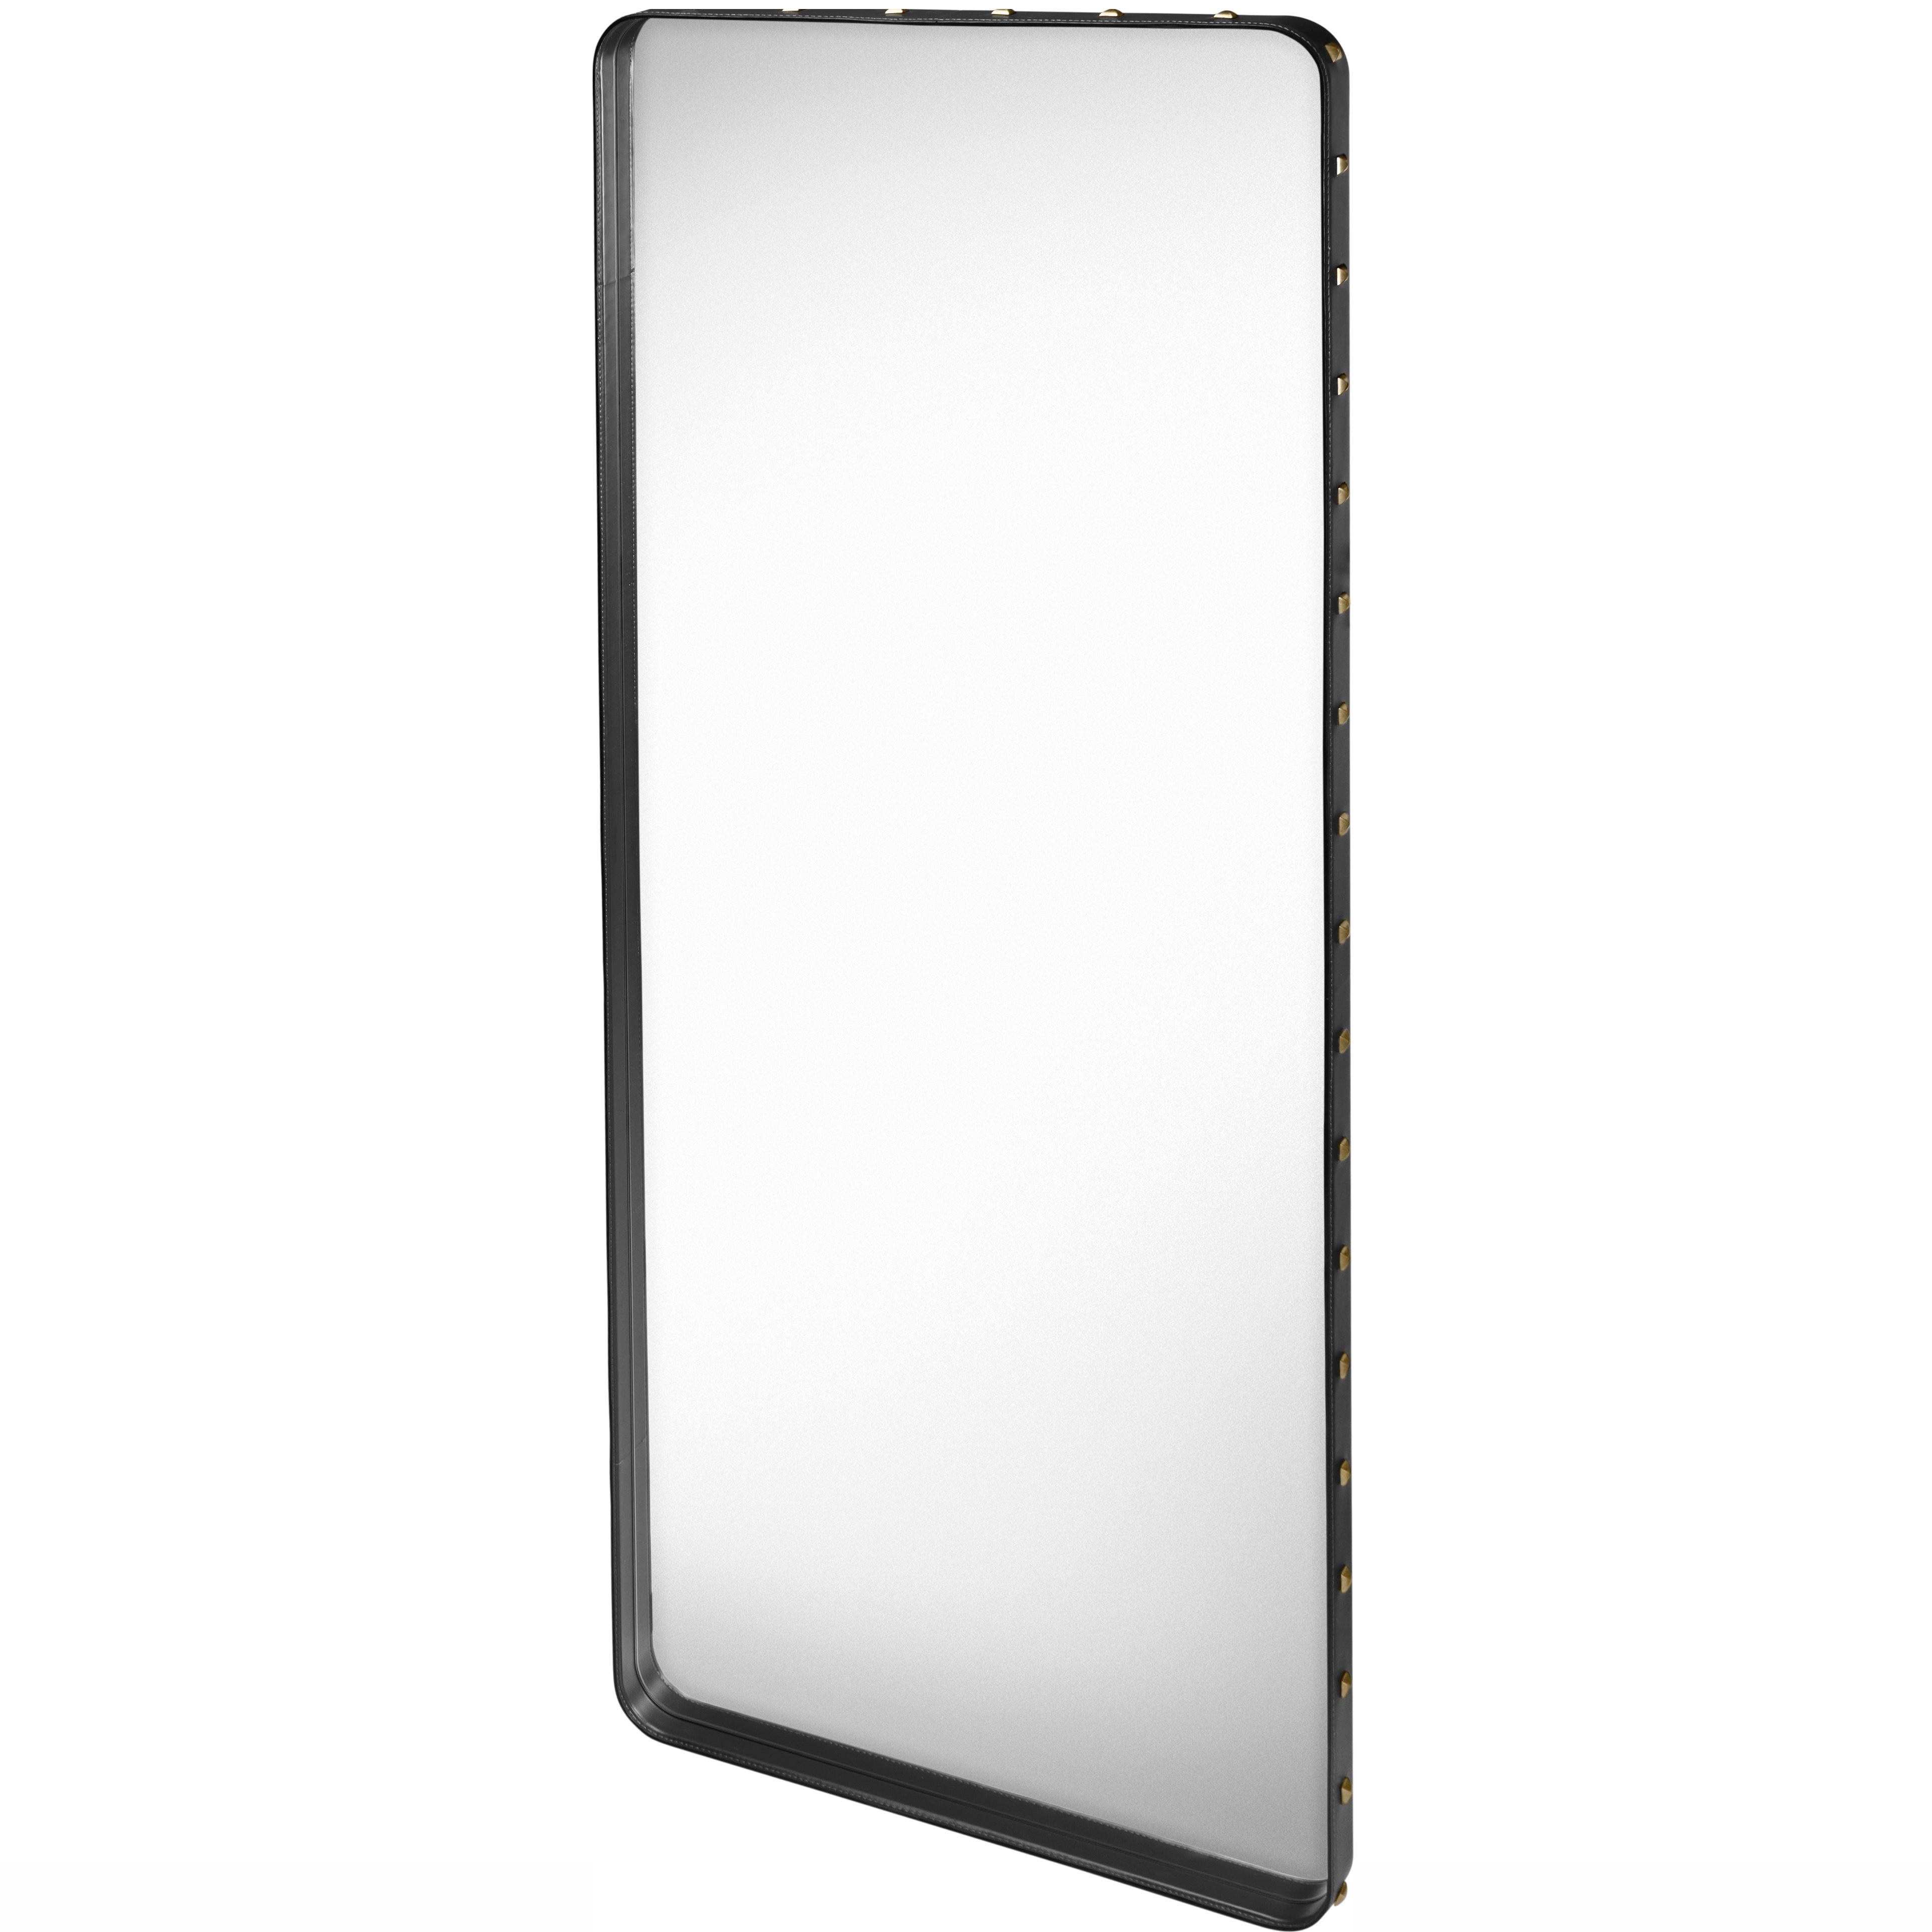 Large Jacques Adnet 'Rectangulaire Mirror' Wall Mirror in Cream Leather for GUBI For Sale 3